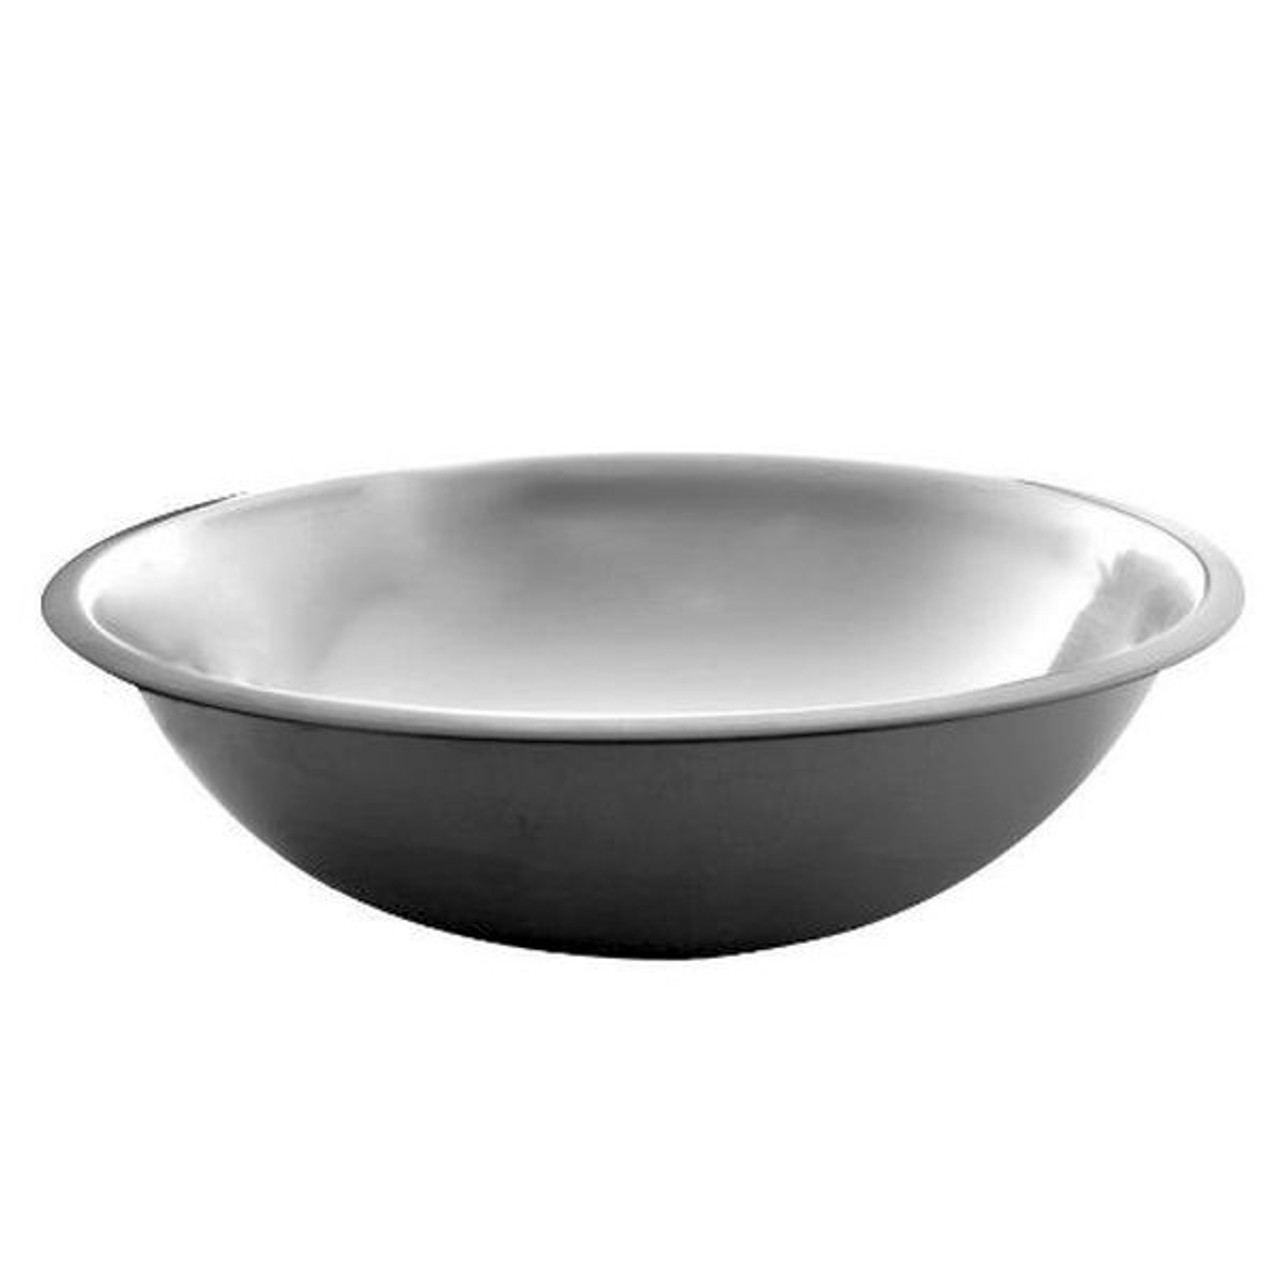 Royal Industries Mixing Bowl, Stainless Steel, 16 qt, Silver